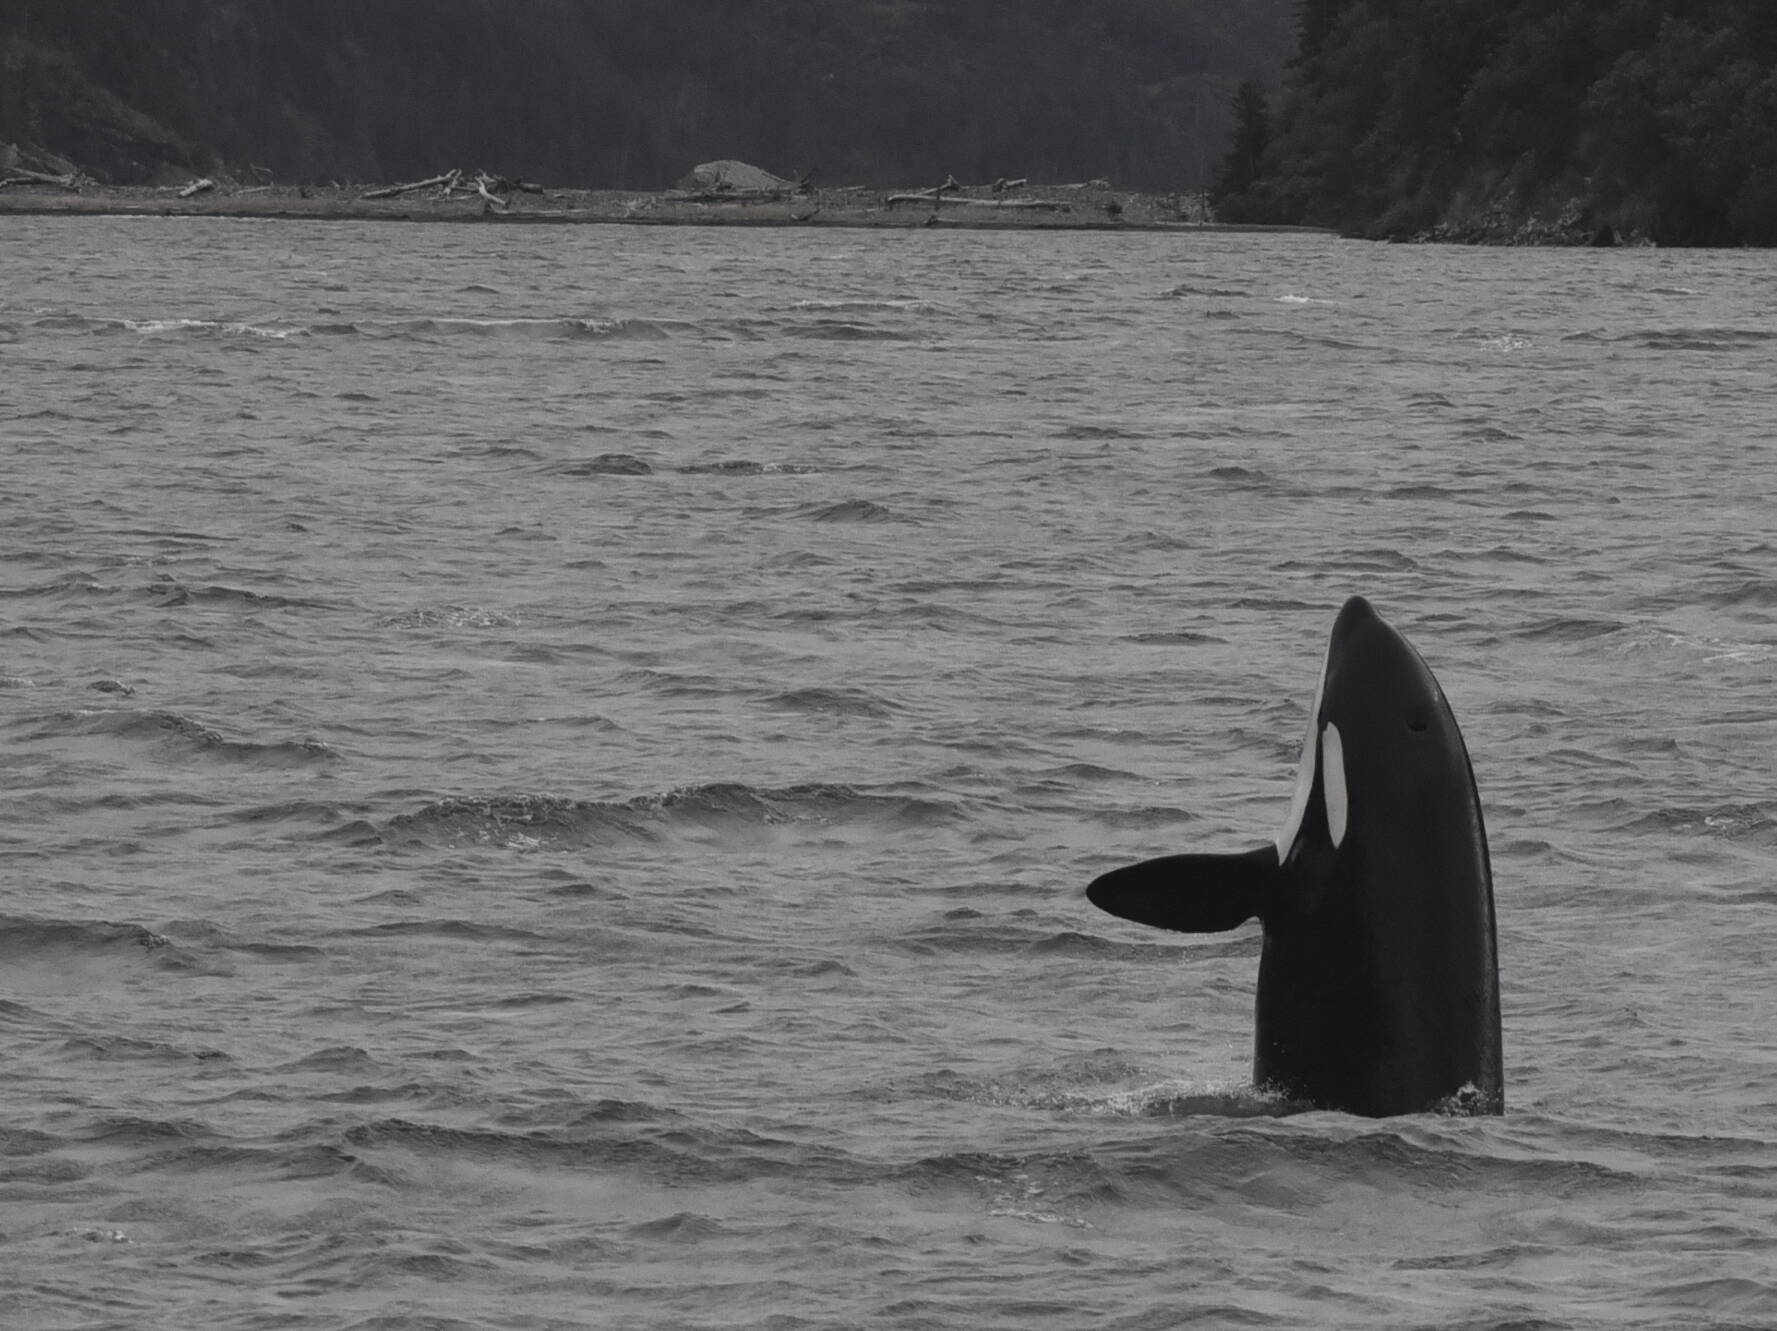 Courtesy Photo / North Gulf Oceanic Society, NMFS research permit 20341
Orcas, like the ones shown in this photo, live to about the same age as people, with females living longer than males.